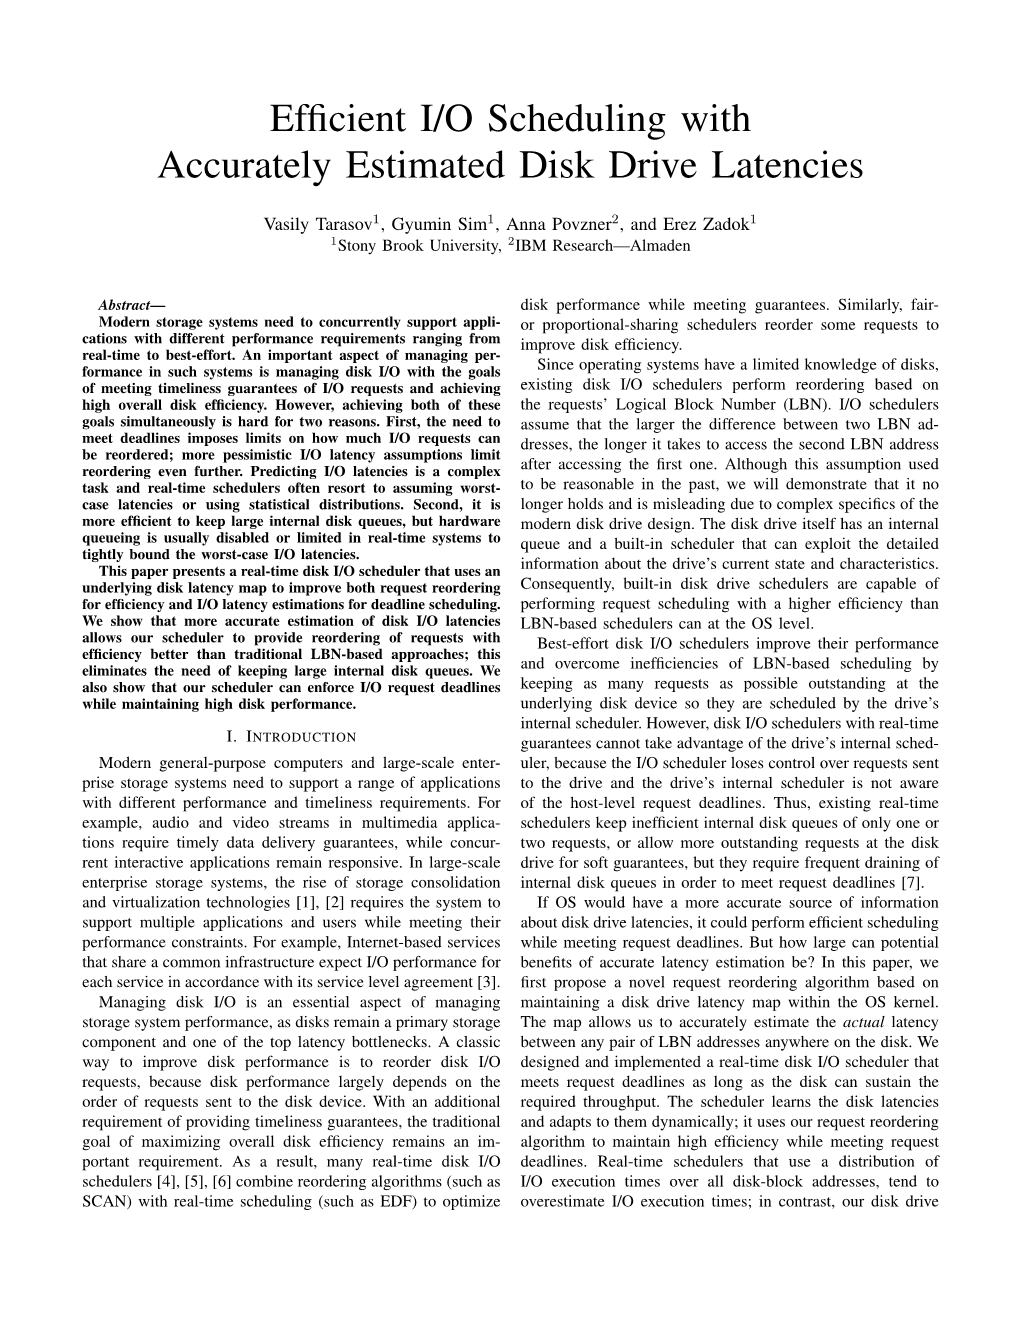 Efficient I/O Scheduling with Accurately Estimated Disk Drive